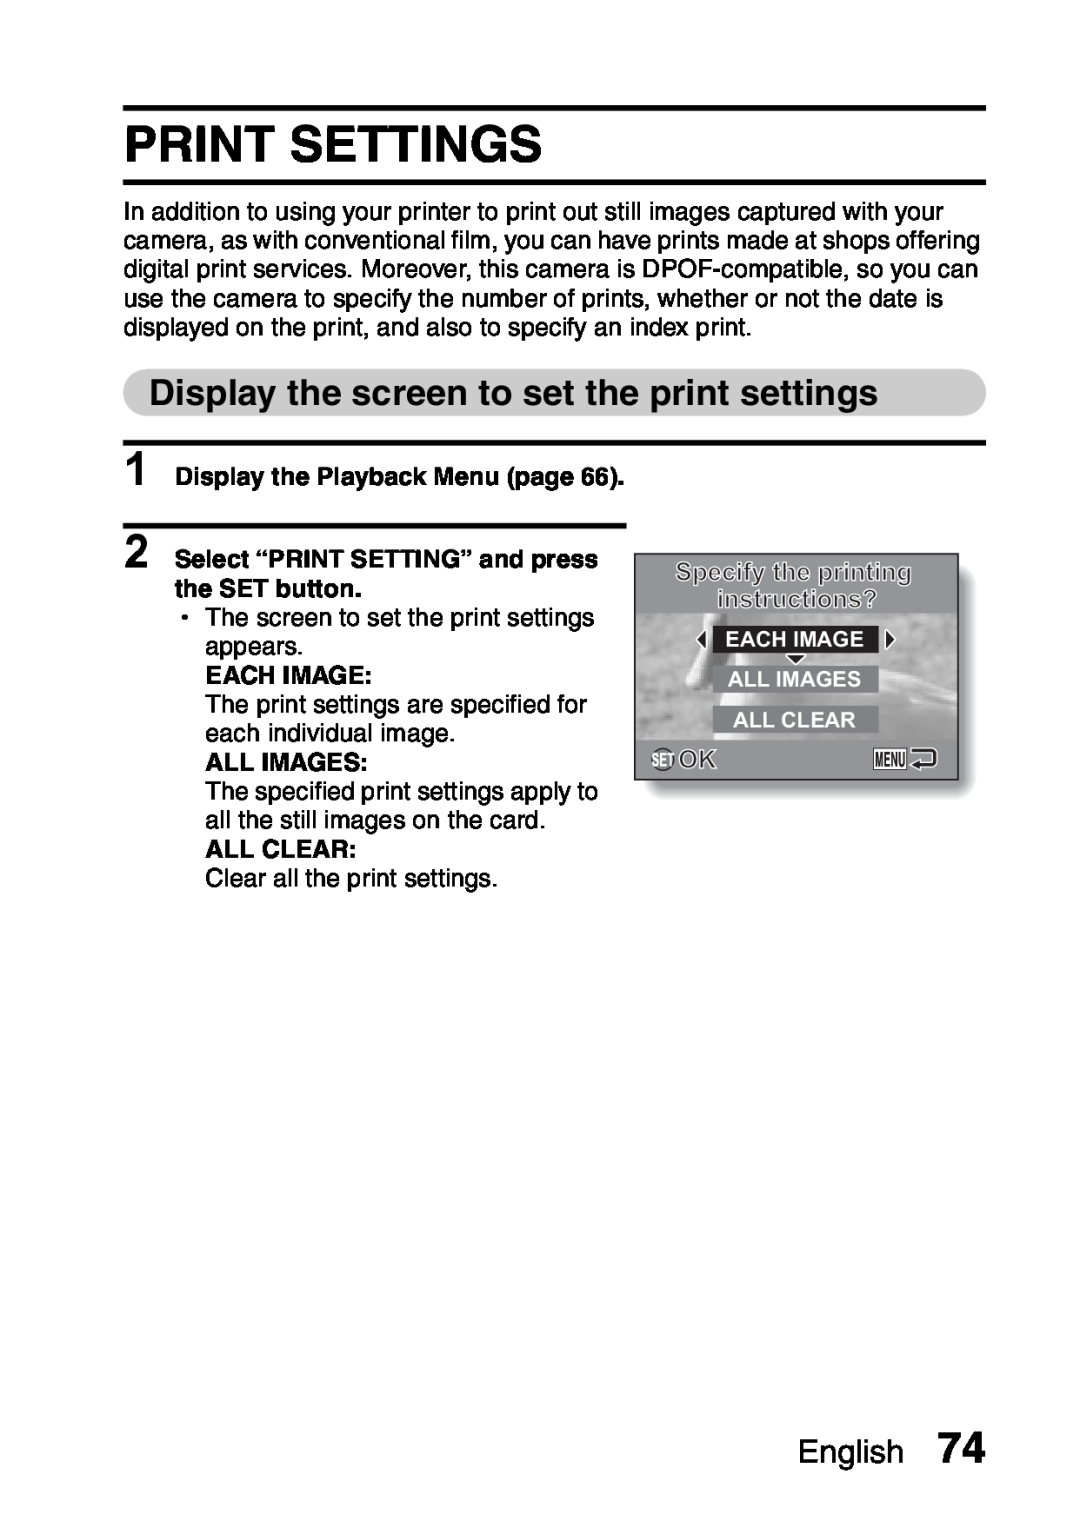 Sanyo VPC-S60 Print Settings, Display the screen to set the print settings, Display the Playback Menu page, Each Image 